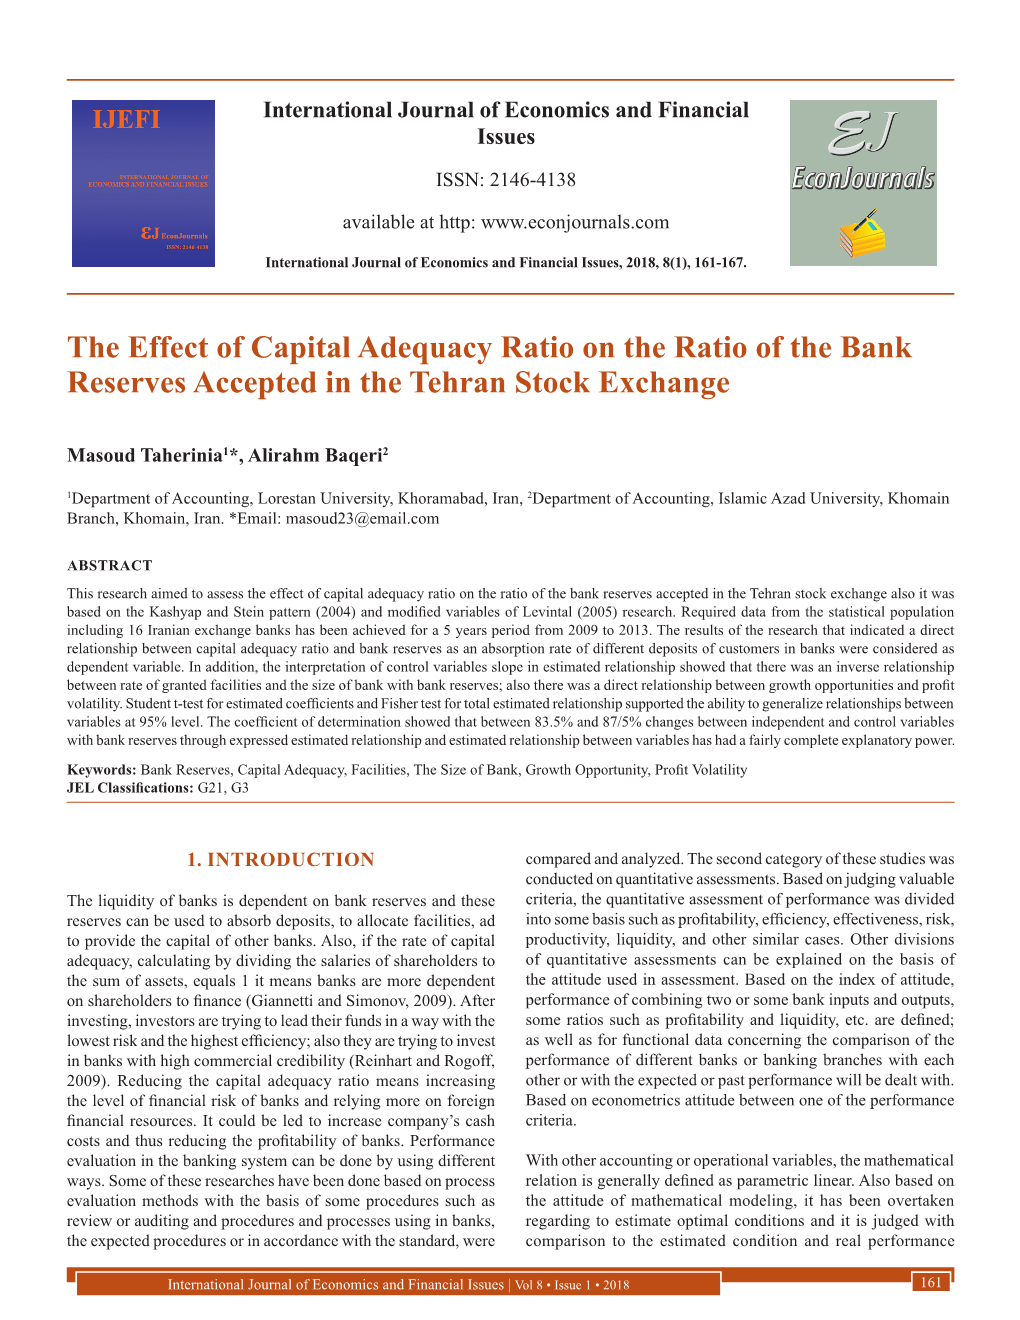 The Effect of Capital Adequacy Ratio on the Ratio of the Bank Reserves Accepted in the Tehran Stock Exchange